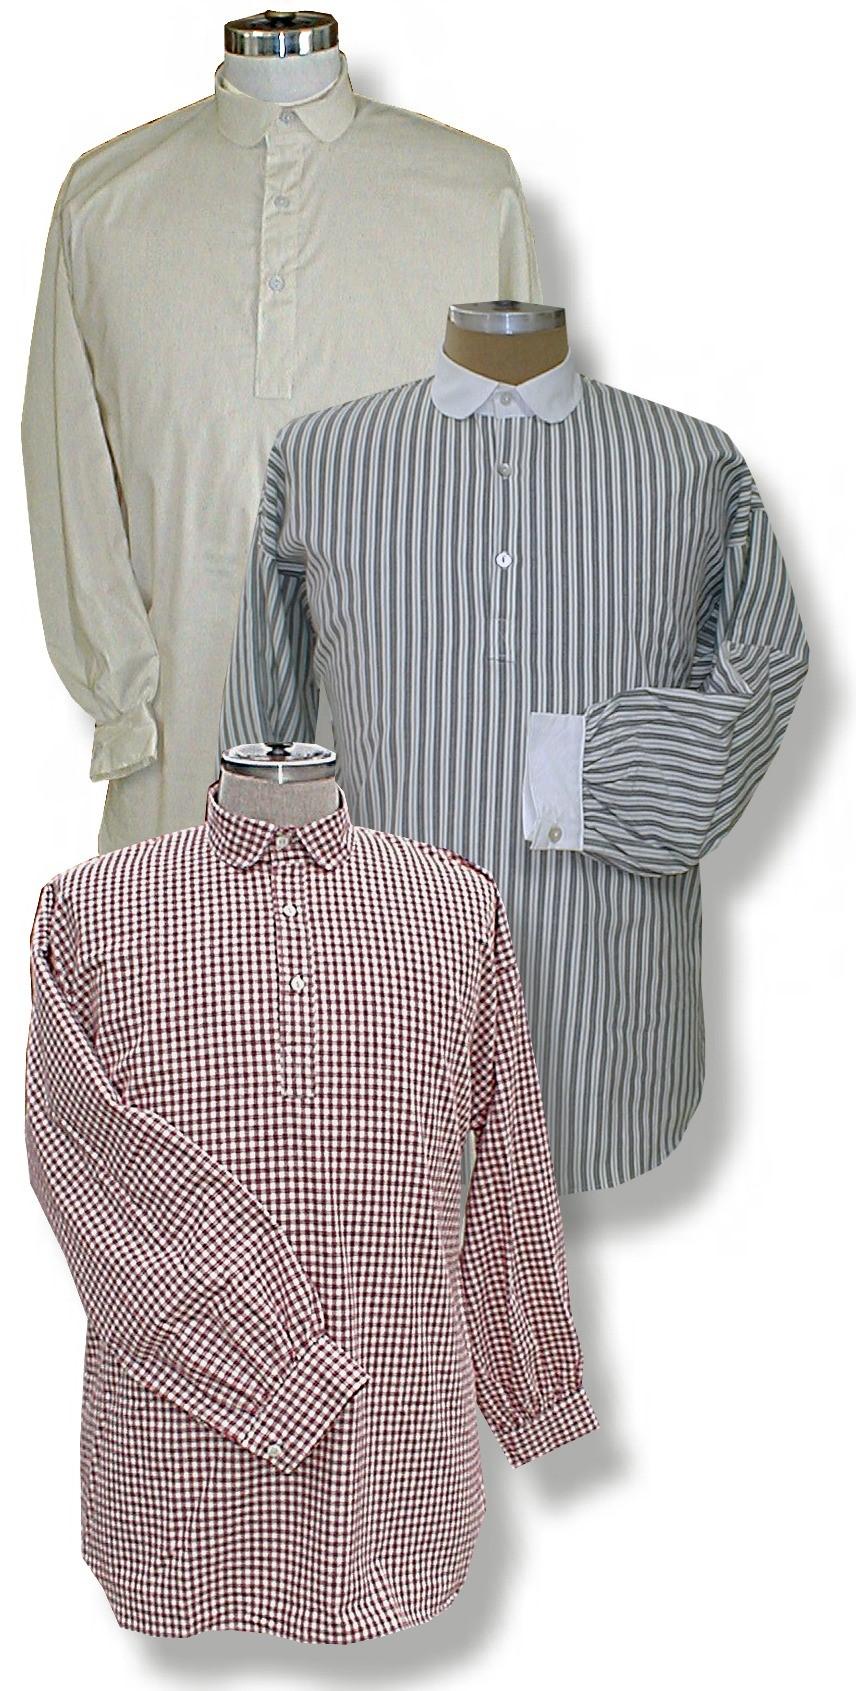 Page 22 Cotton Shirts Drop Shoulder Pattern 1850-1875 #1701 Shirt. #1706 Shirt in Blue Ticking with White Collar and Cuffs.. 1850 to 1875 Cotton Shirt with Stand and Fall Collar.